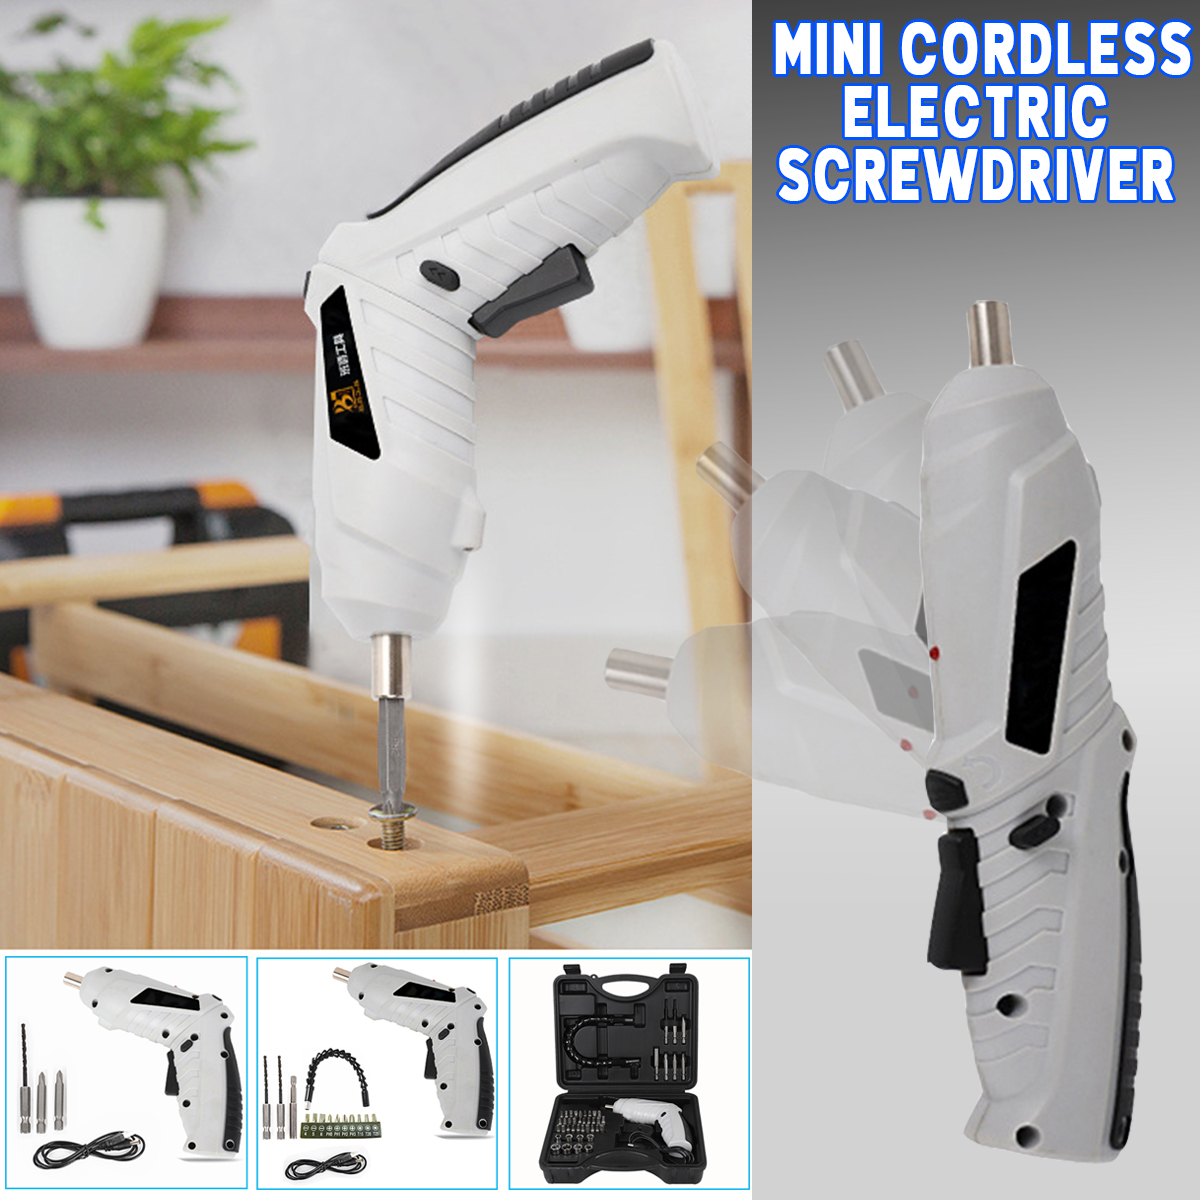 Mini Cordless Electric Screwdriver Set USB Rechargeable Drill Driver With Work Light 35